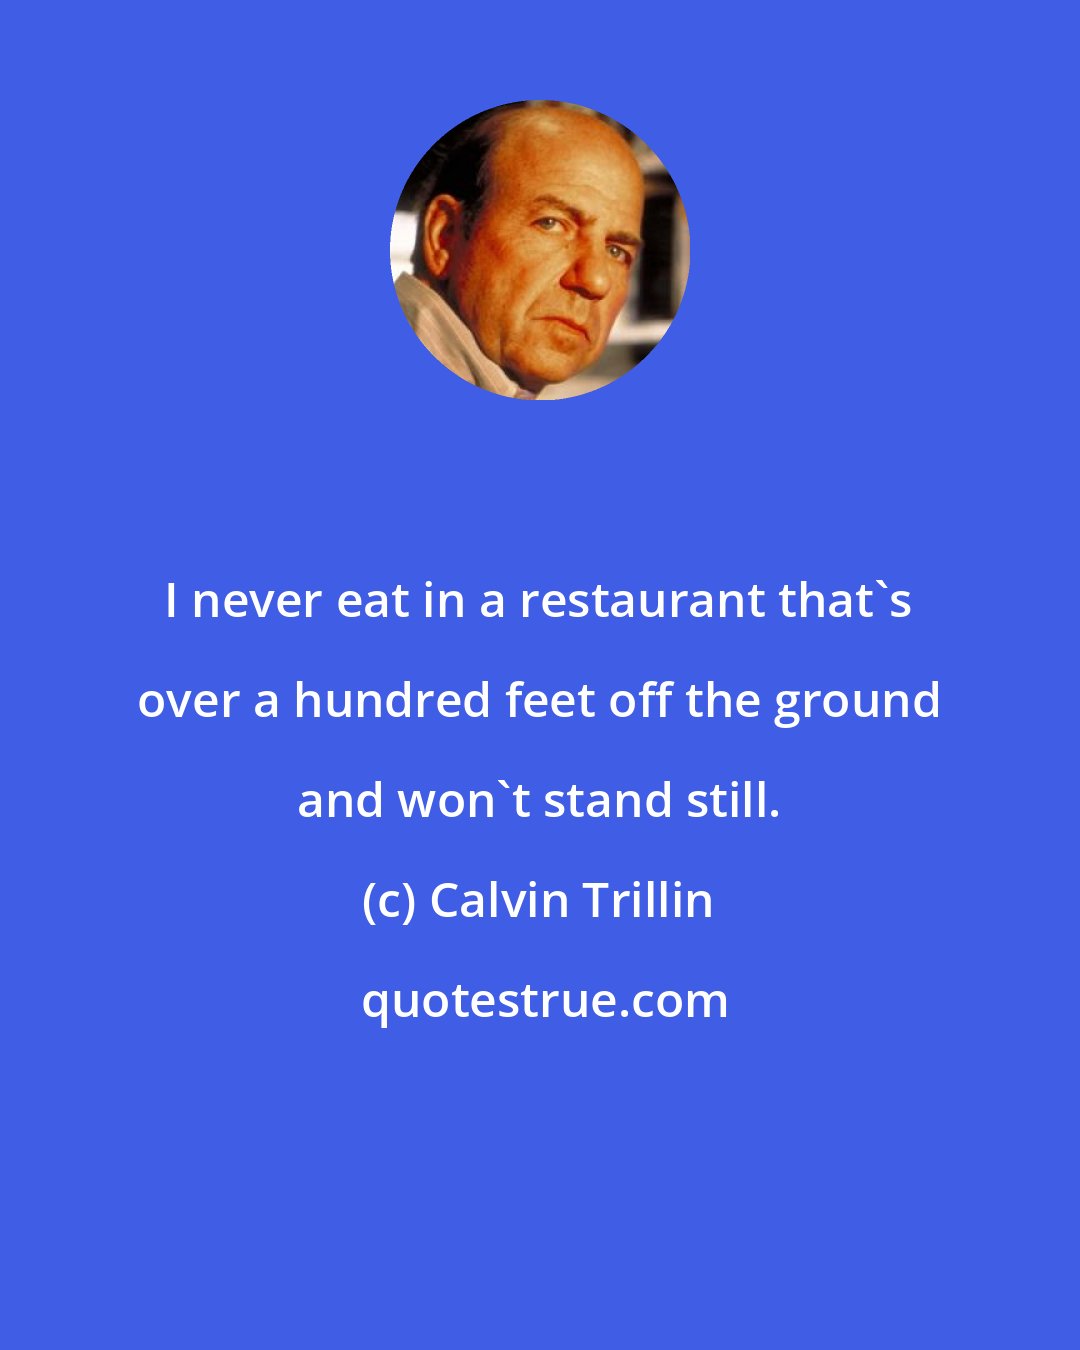 Calvin Trillin: I never eat in a restaurant that's over a hundred feet off the ground and won't stand still.